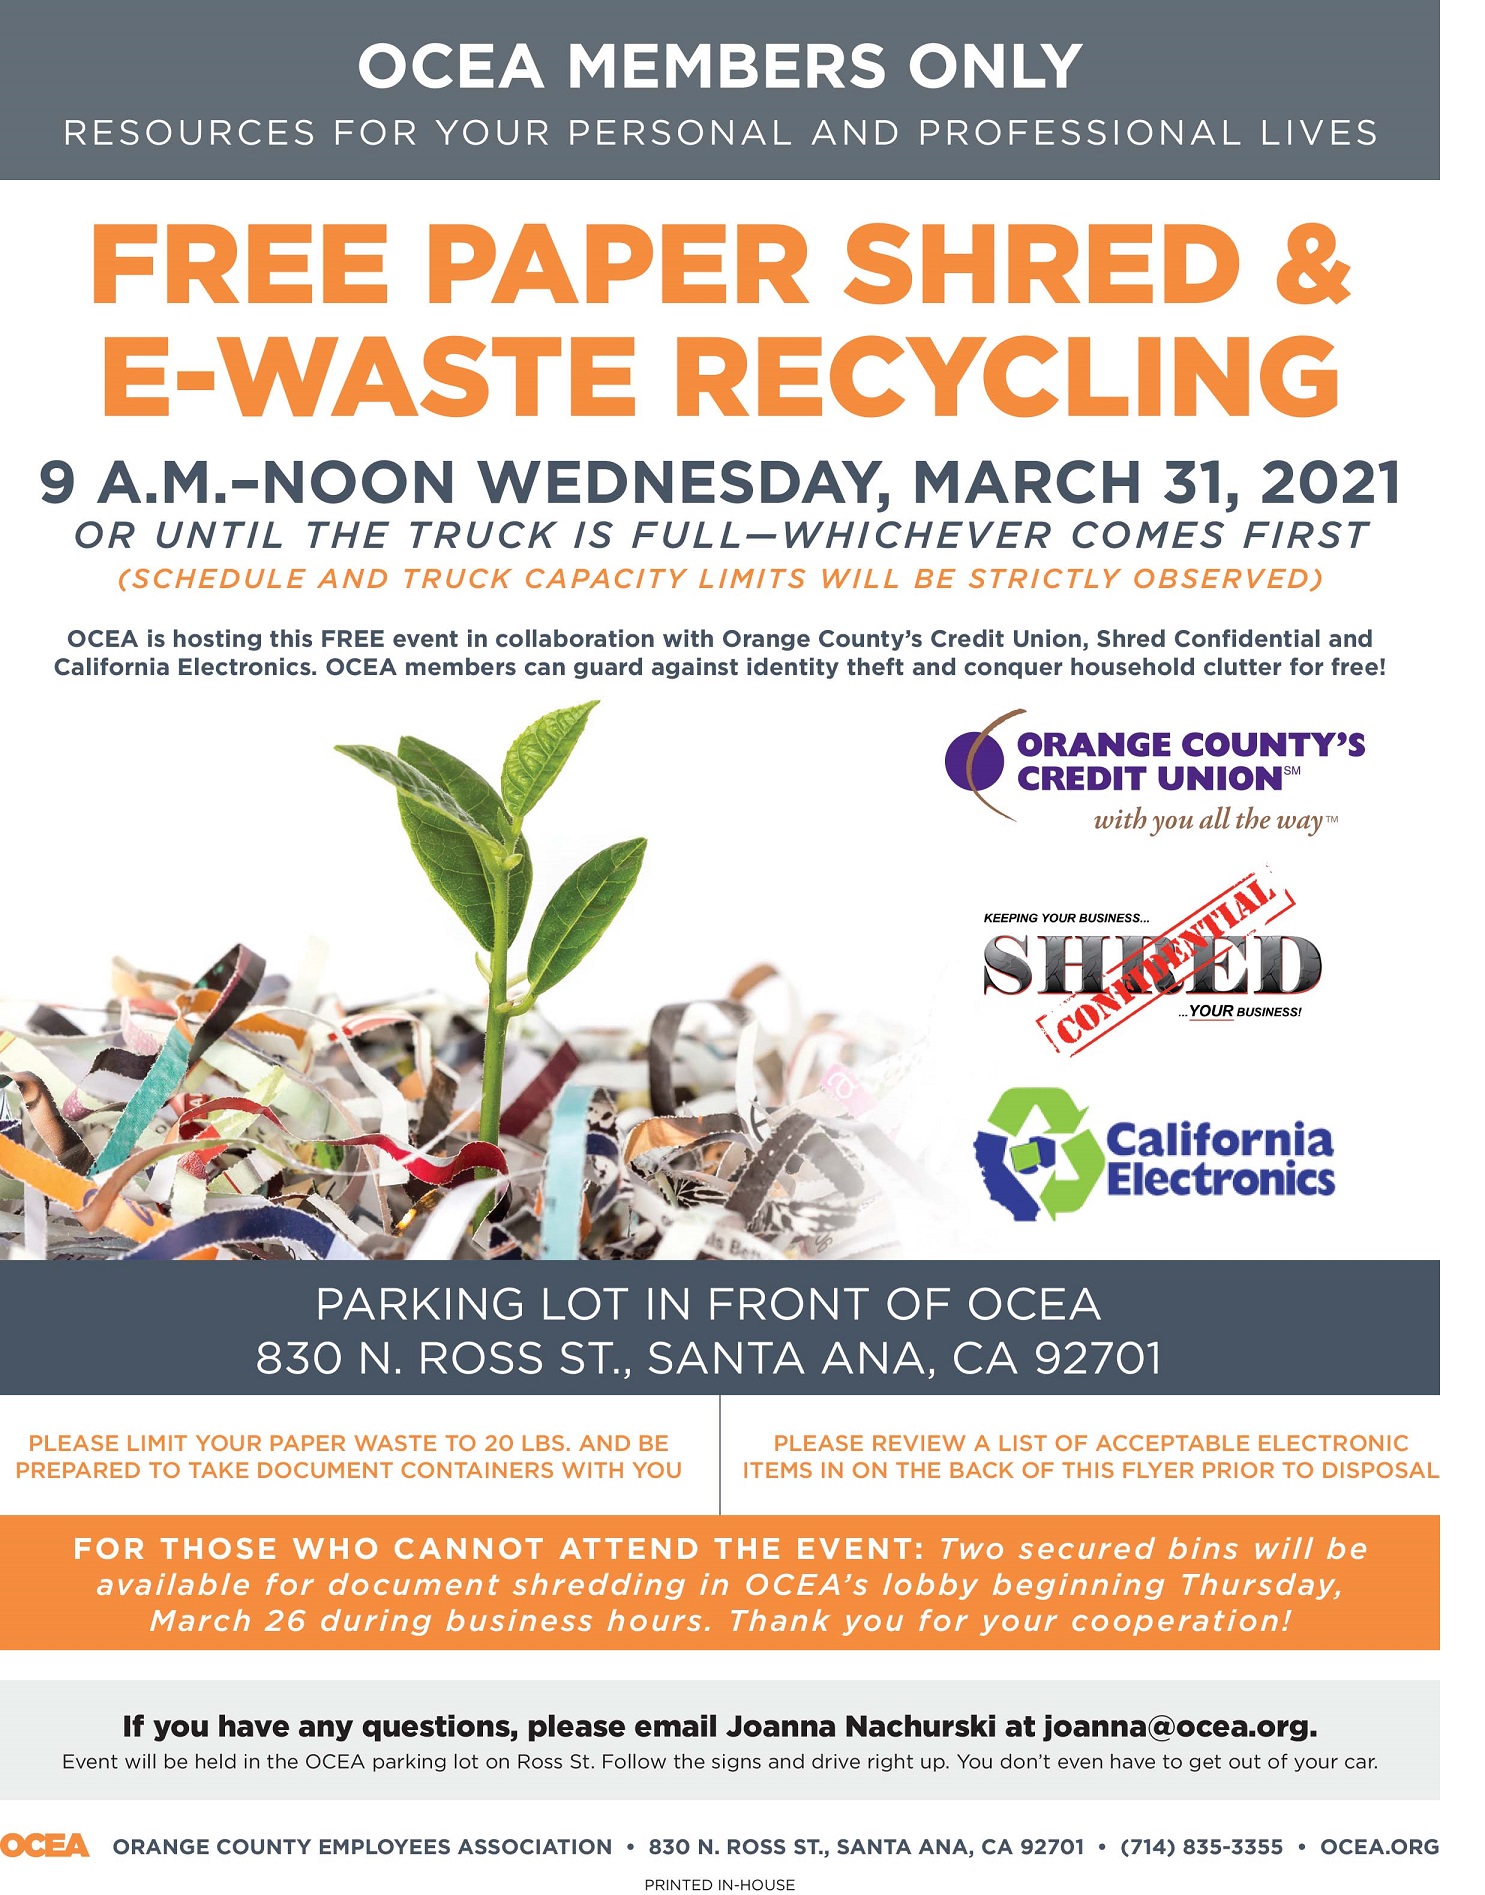 FREE PAPER SHRED EVENT Wednesday, March 31! Orange County Employees